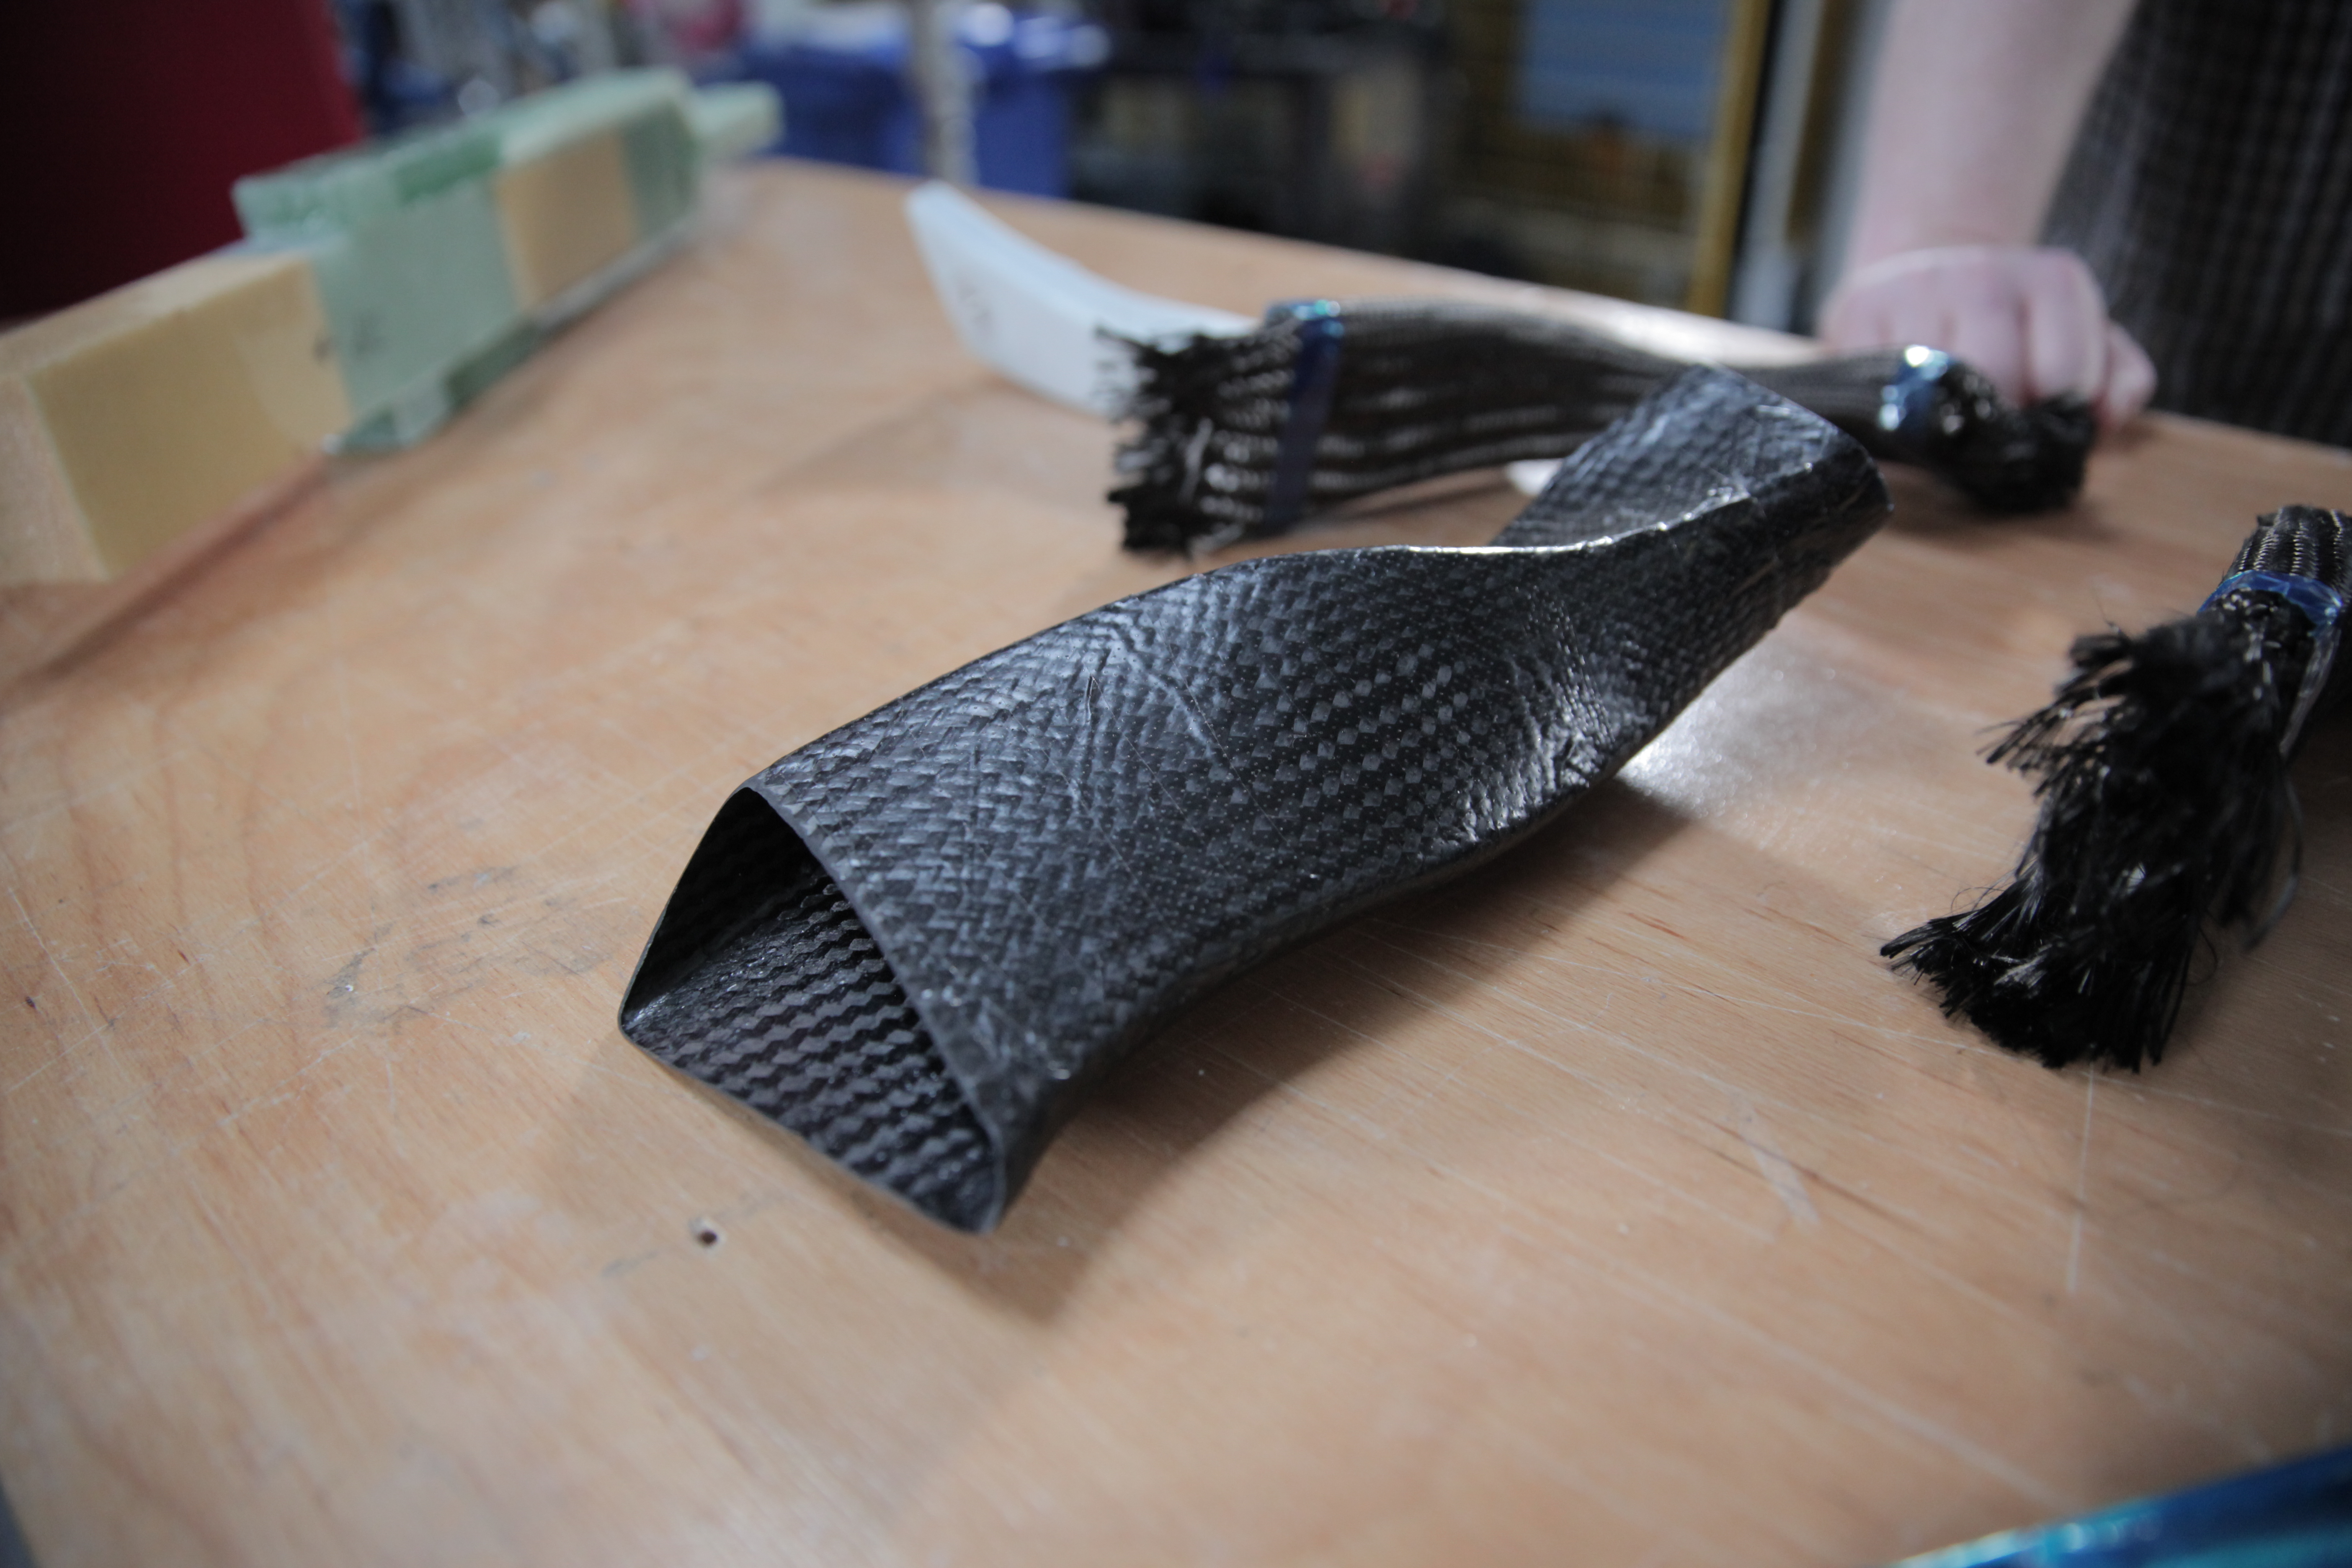 Carbon Fiber: Definition, Properties, Applications, and Uses in 3D